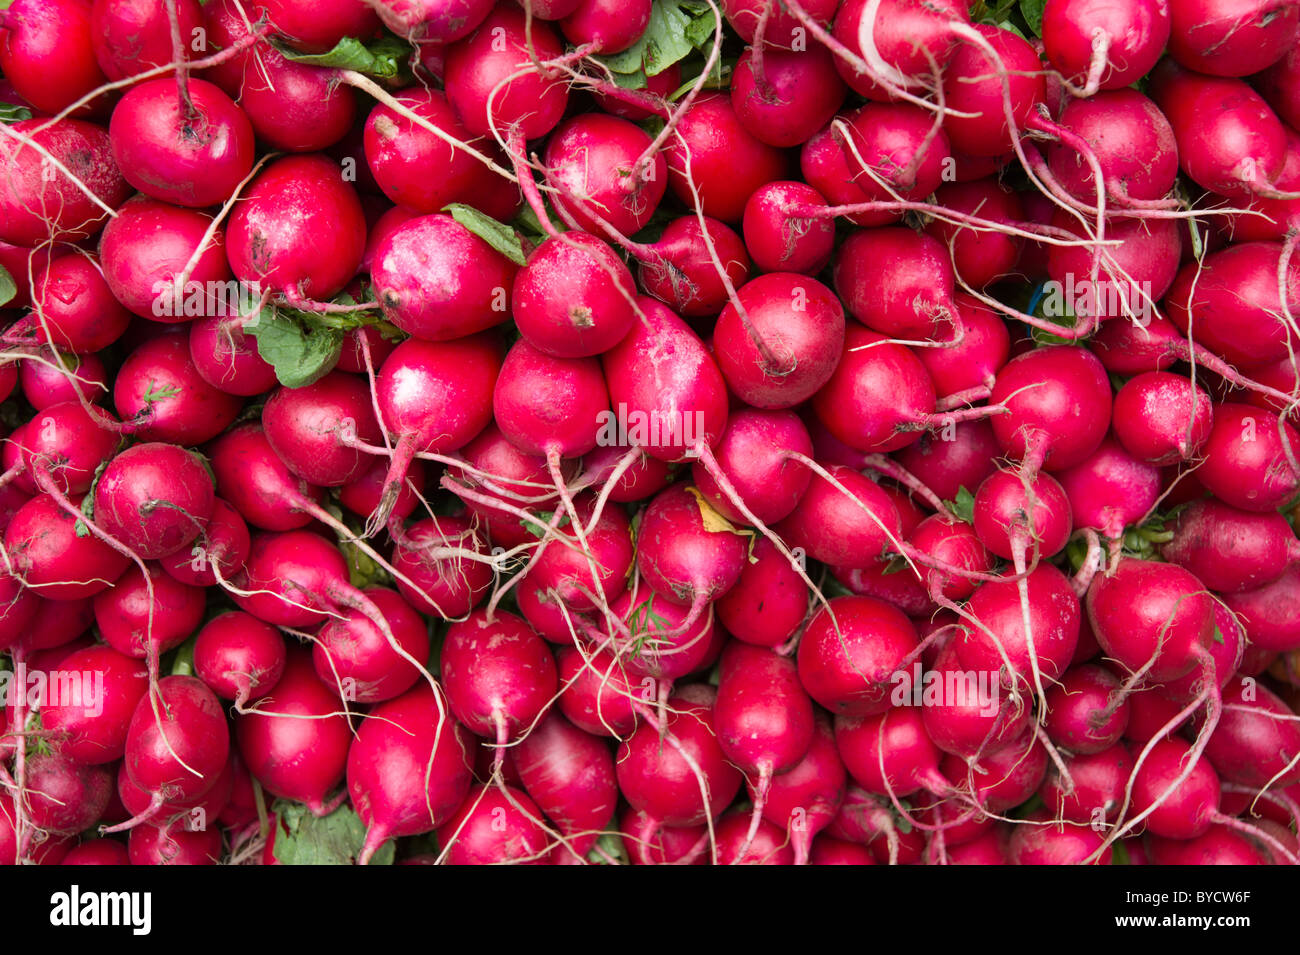 Radishes and carrots on vegetable market stall Stock Photo